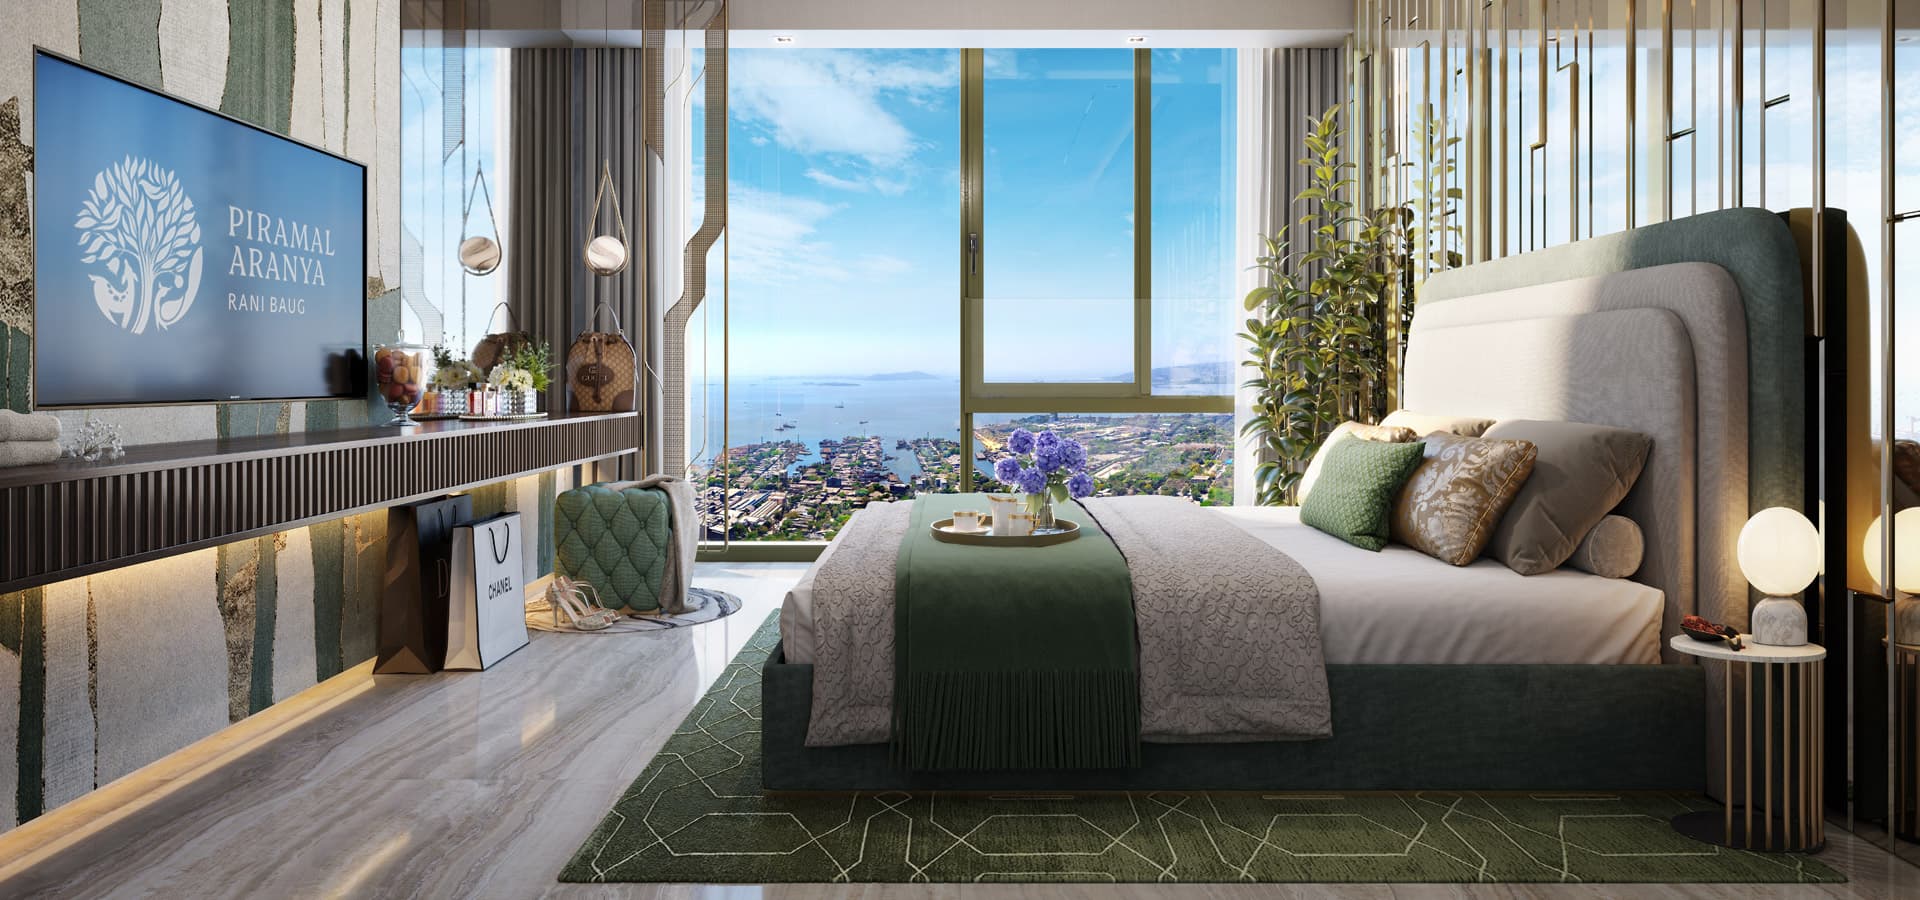 Piramal Aranya's interior showcases a luxurious bedroom with a stunning view facing the harbor, embodying luxury apartments in Byculla.